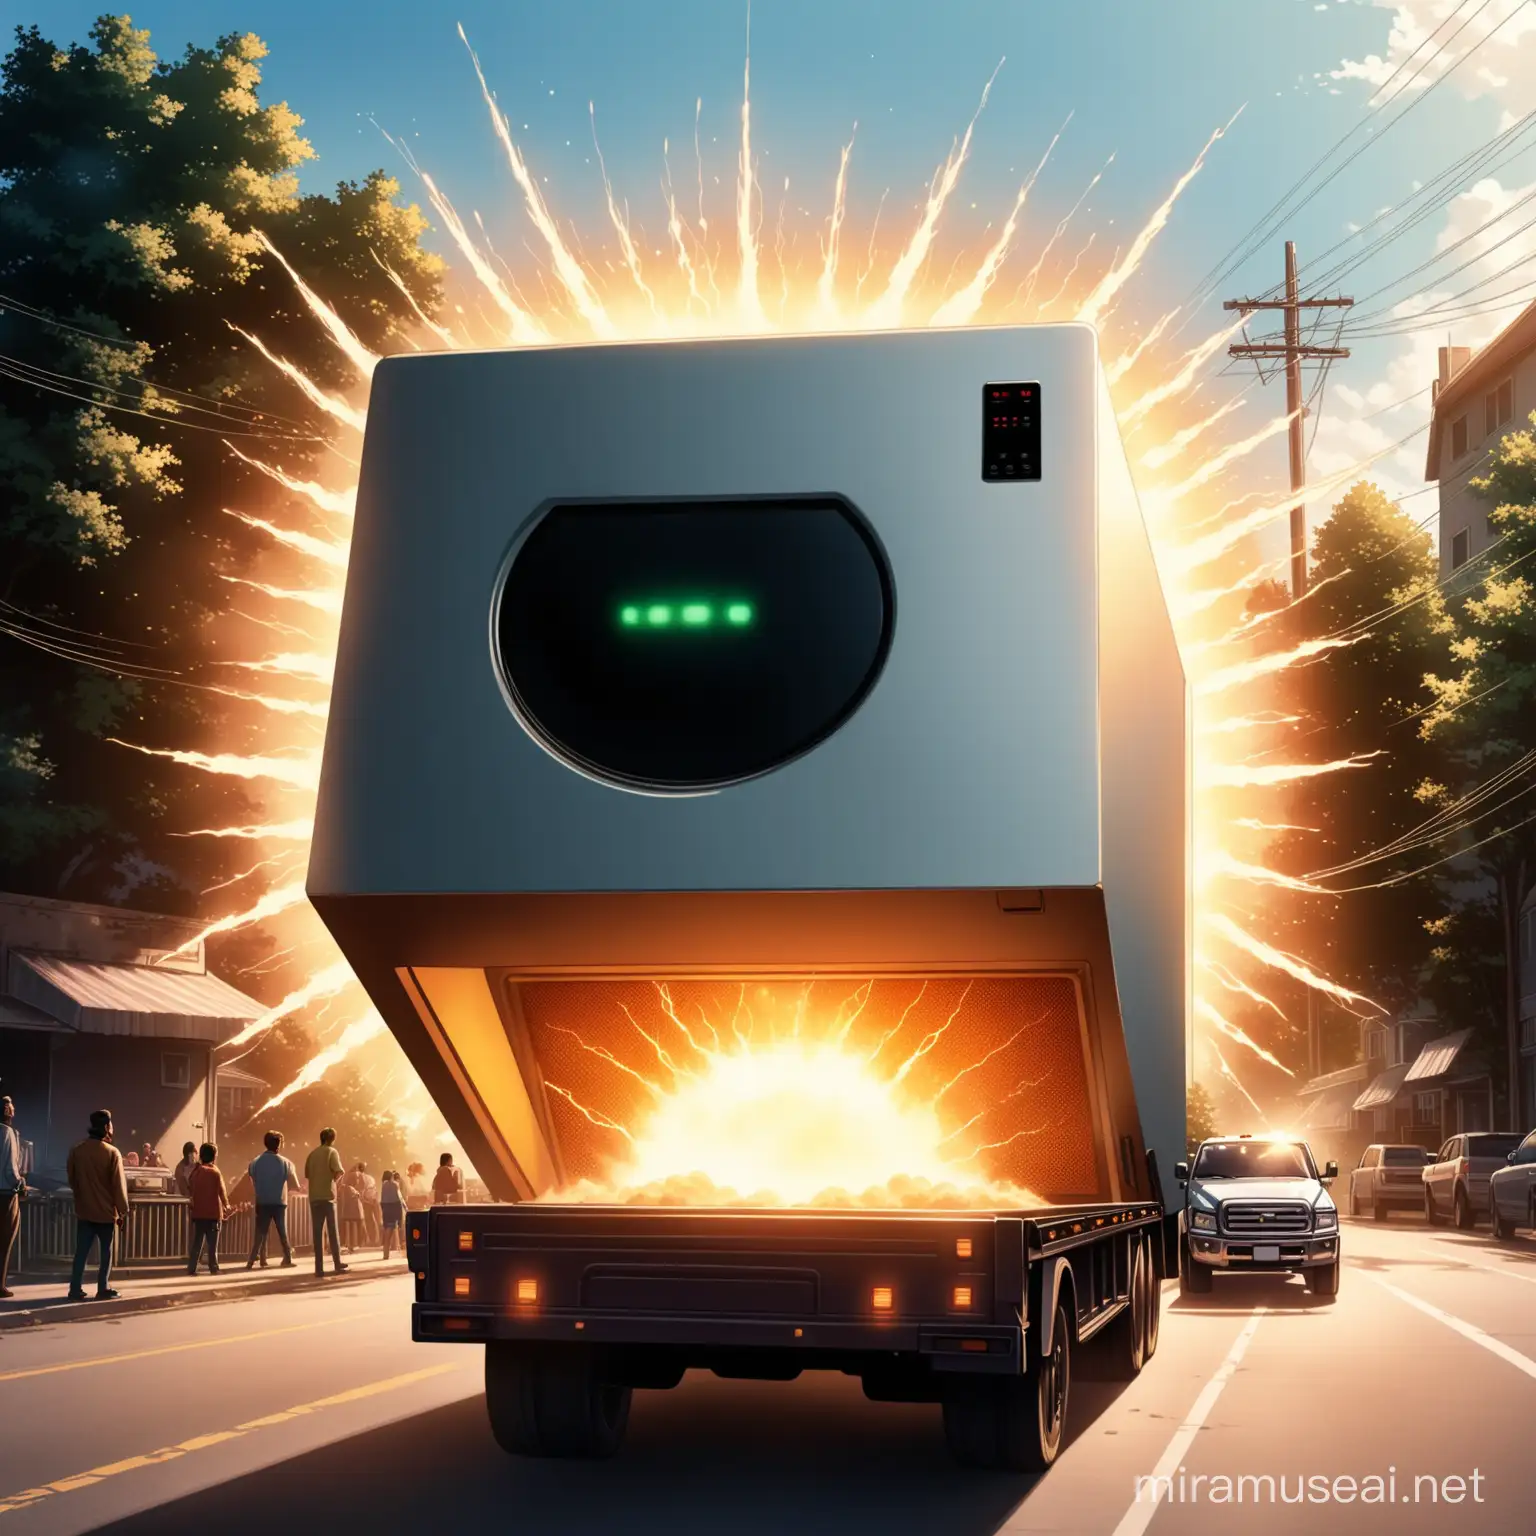 A giant open microwave oven mounted on a truck, the truck is shooting electricity like a giant EMP-device. It´s driving around a happy neighborhood with people sheering alongside the road. Realistic DC-comic style, 4k.